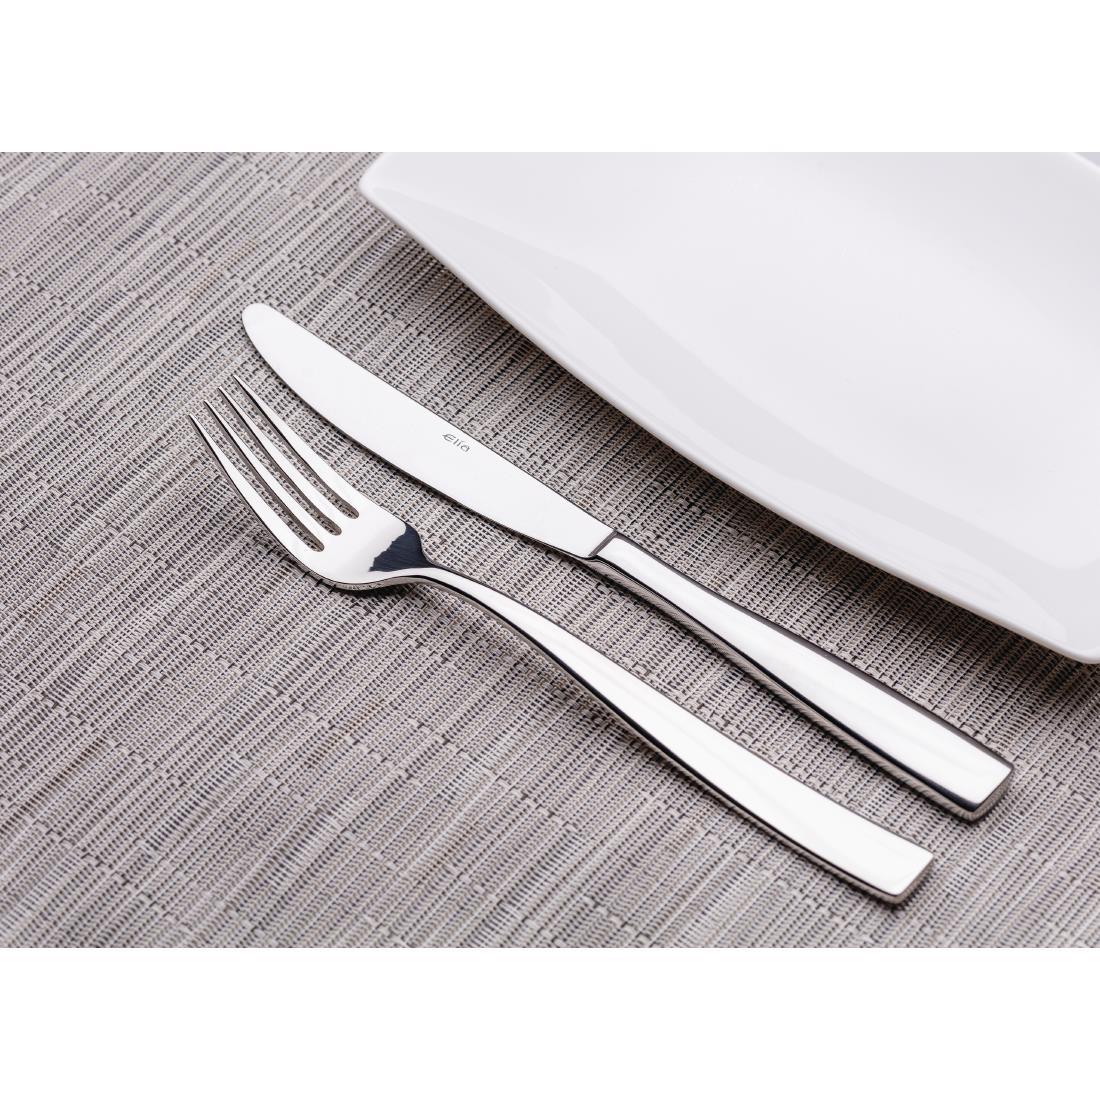 Elia Aspect Table Fork 18 10 (Pack of 12) - FD413  - 3